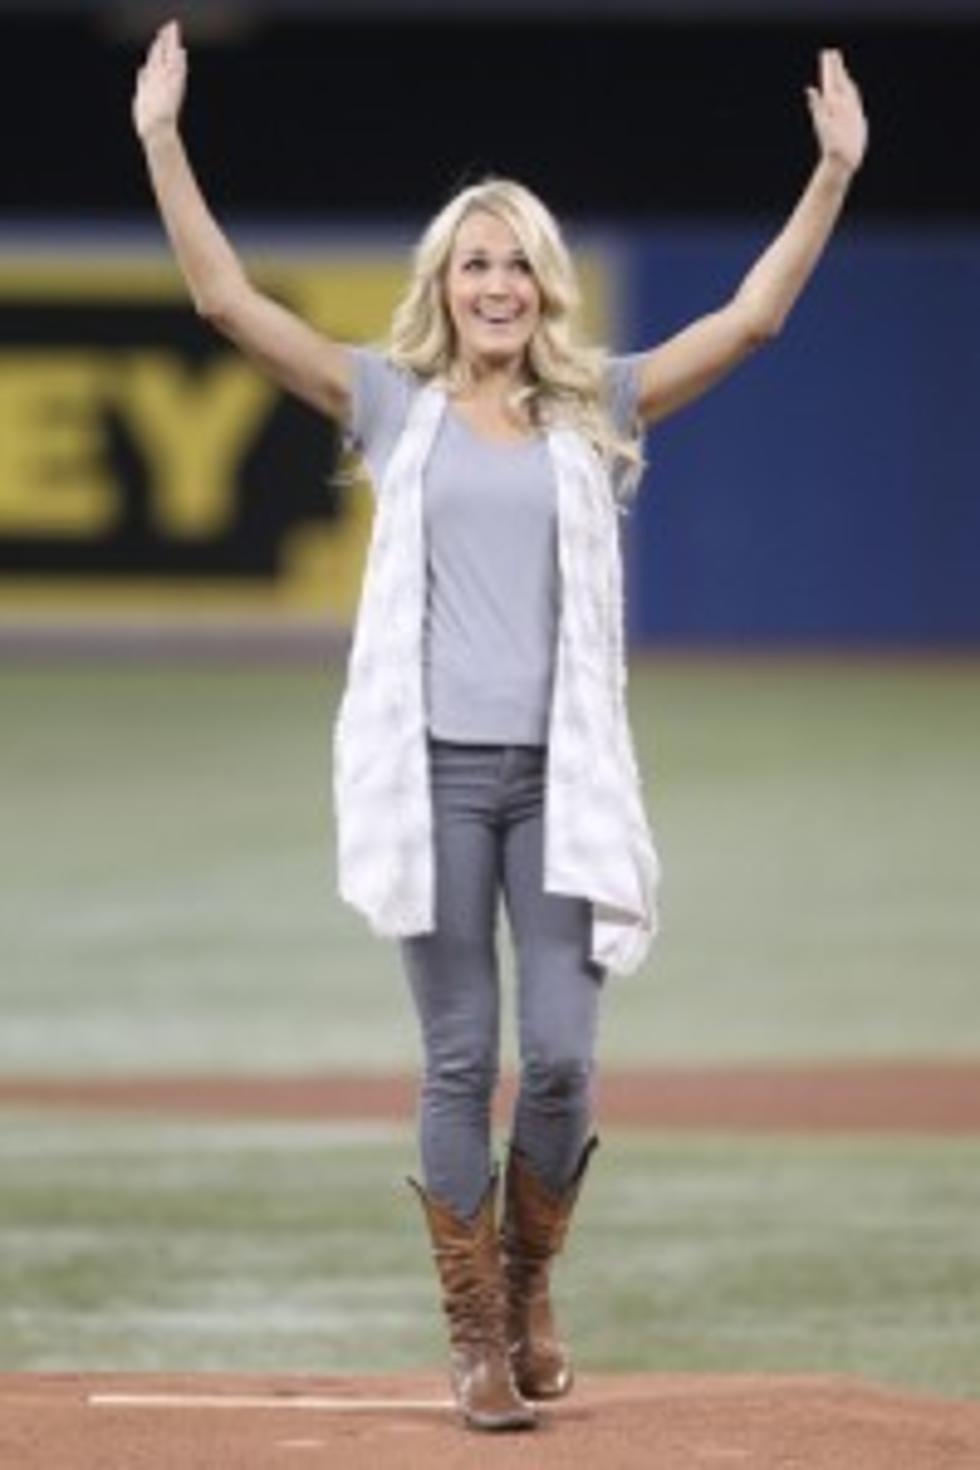 Carrie Underwood Should Have Pitched for the Yankees!